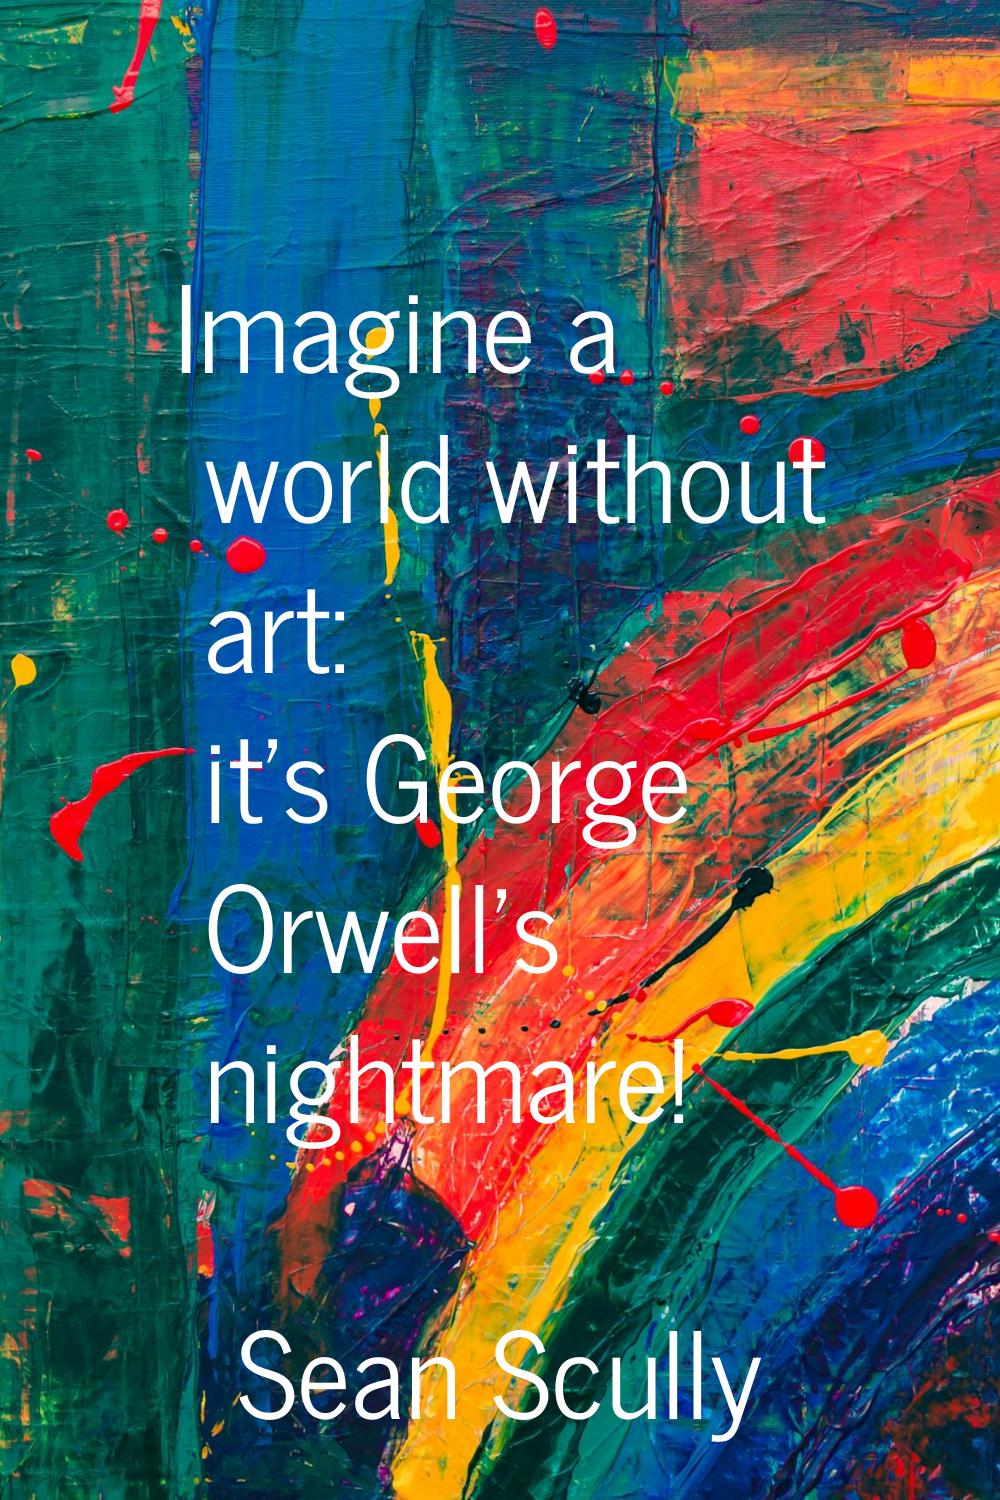 Imagine a world without art: it's George Orwell's nightmare!